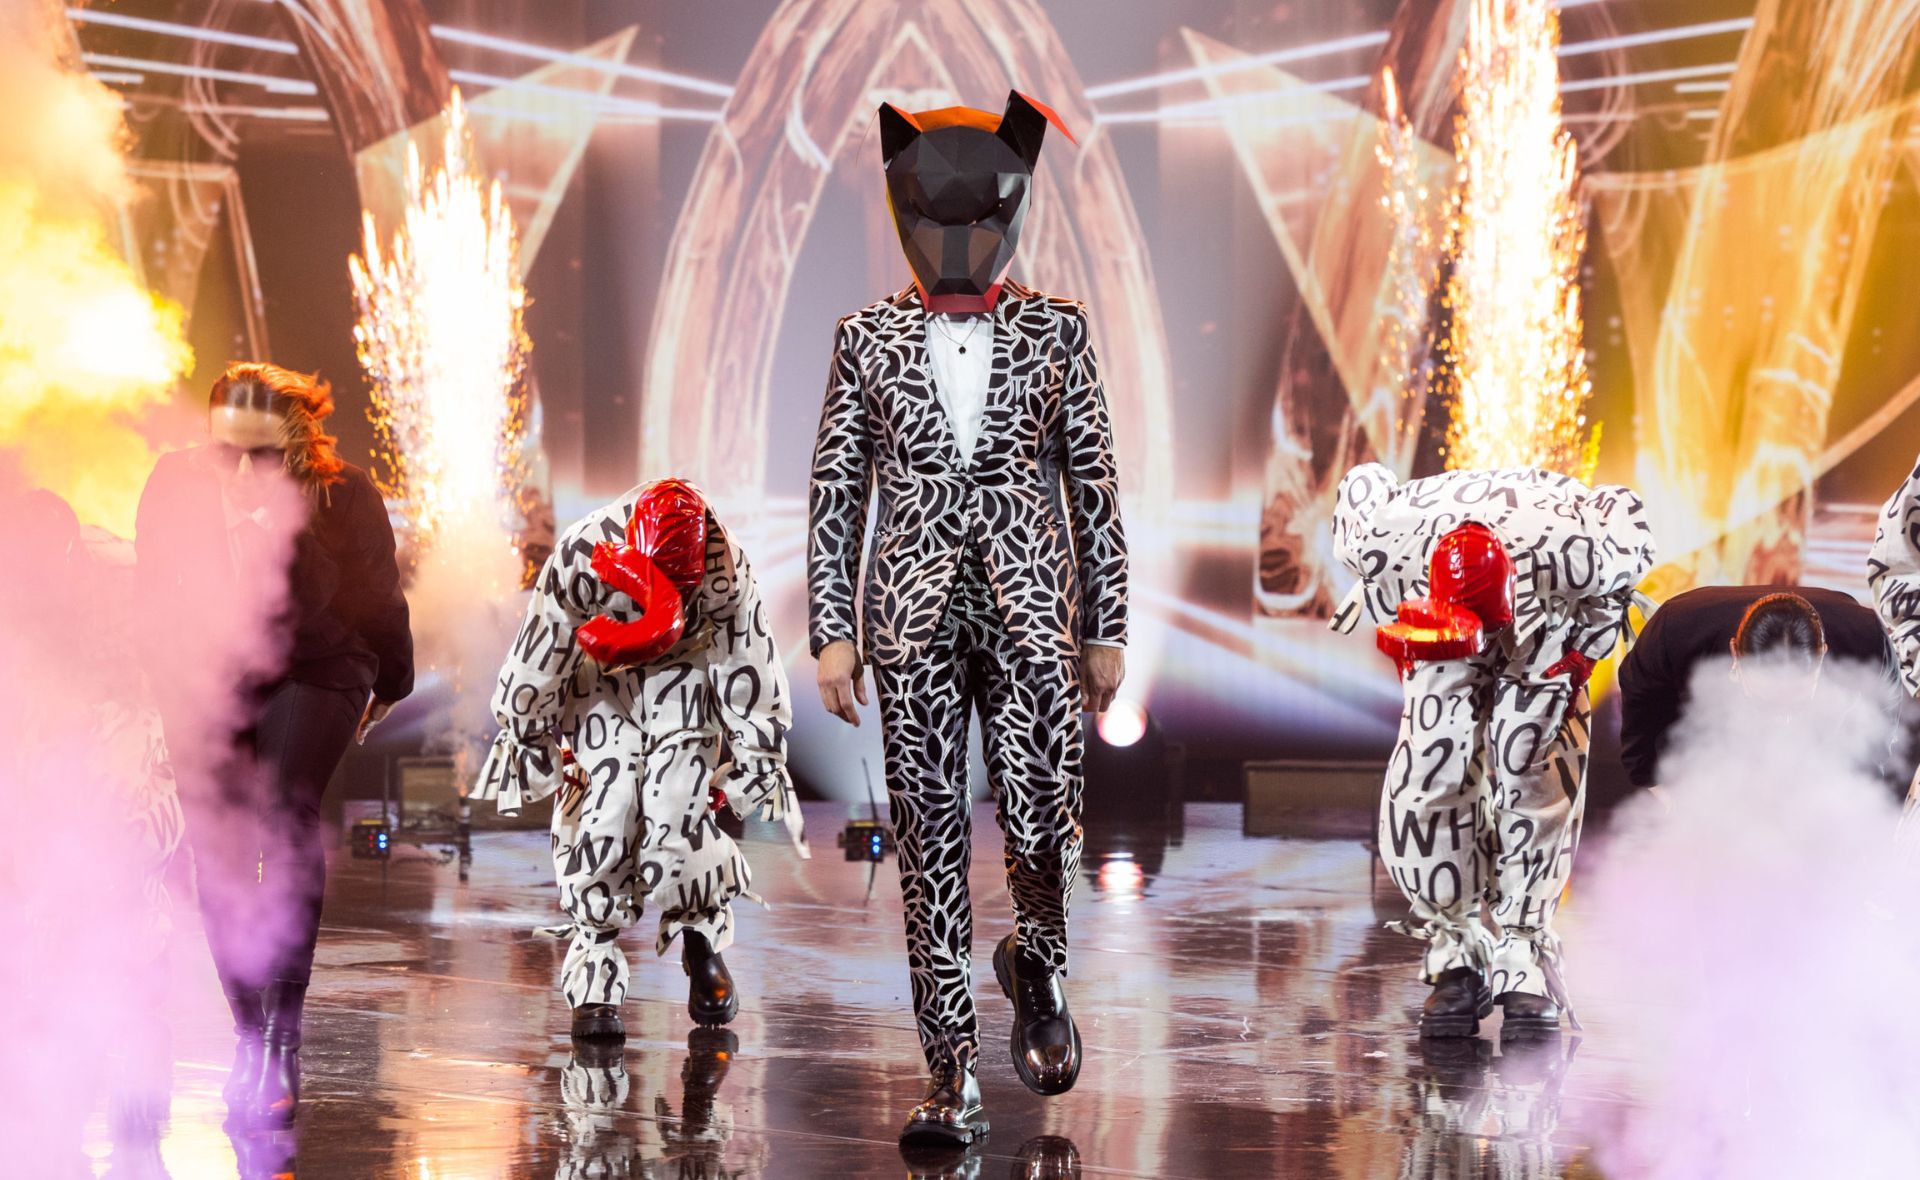 The Masked Singer Australia has unveiled its winner for 2022!